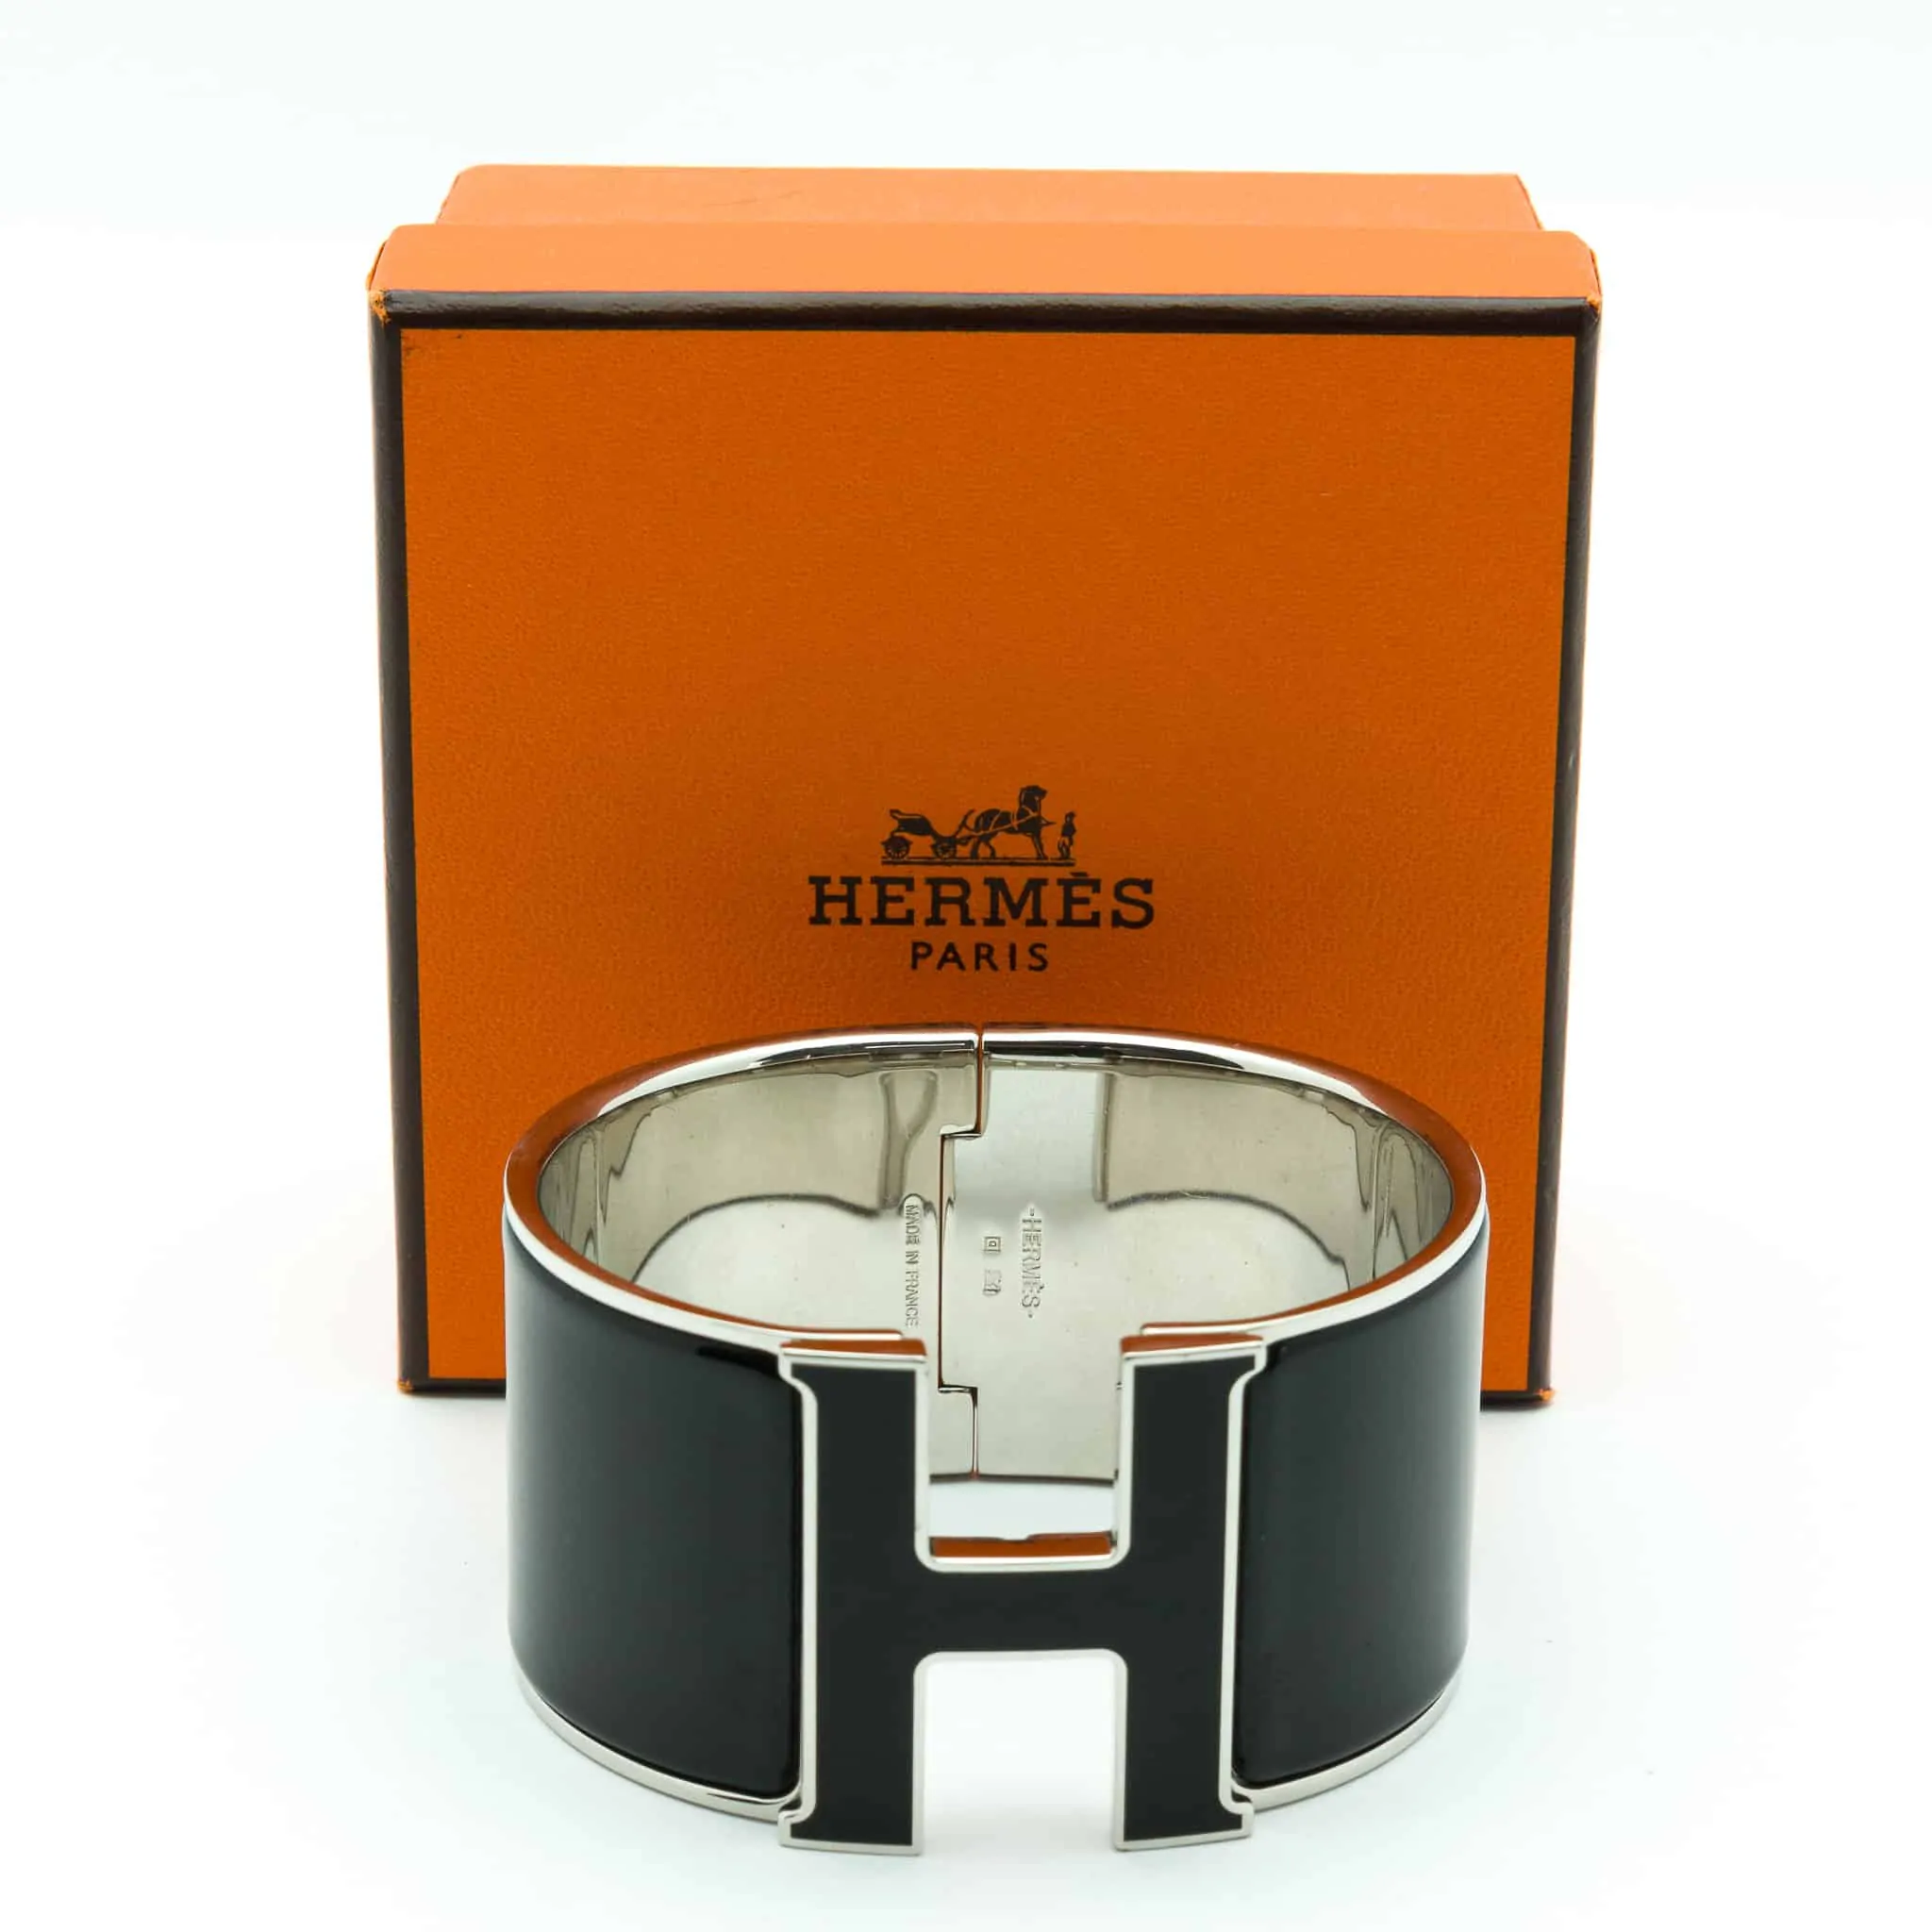 Hermes Clic Clac H Bracelet in 18kt Pink Gold with Black Leather,Narrow